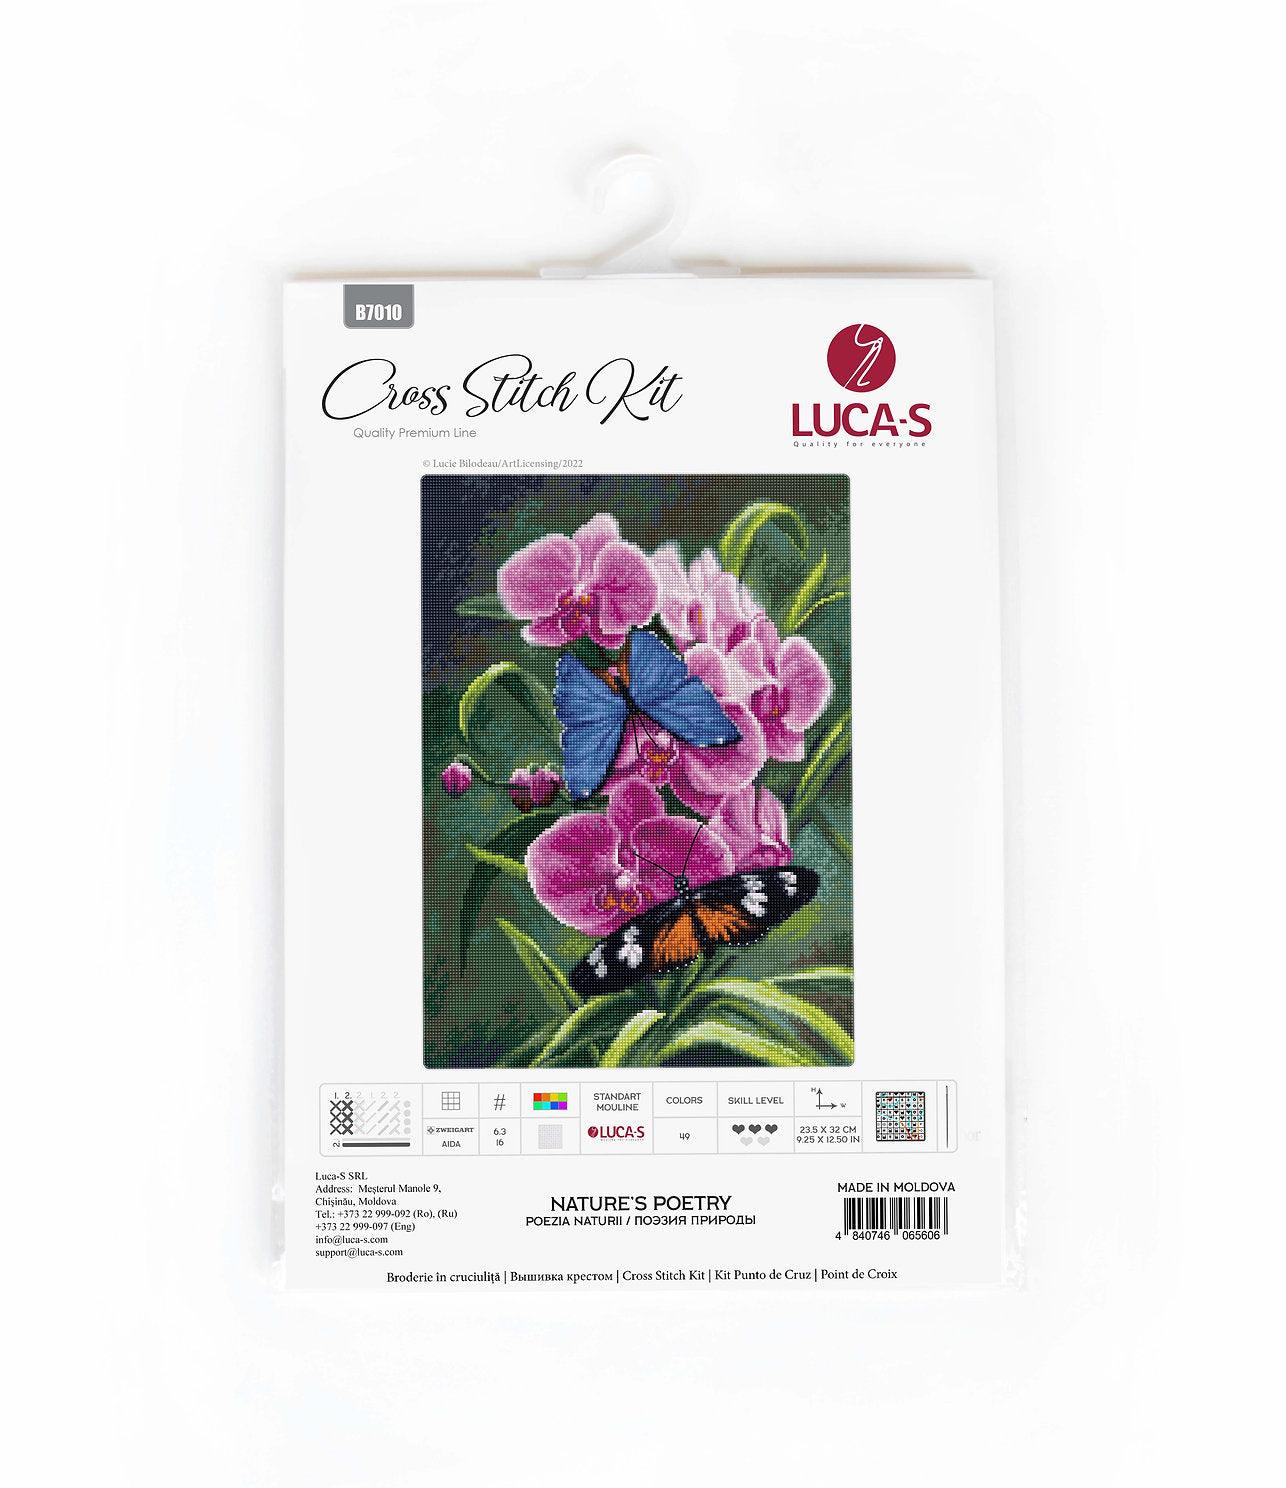 Cross Stitch Kit Luca-S - Nature’s Poetry, B7010 - Luca-S